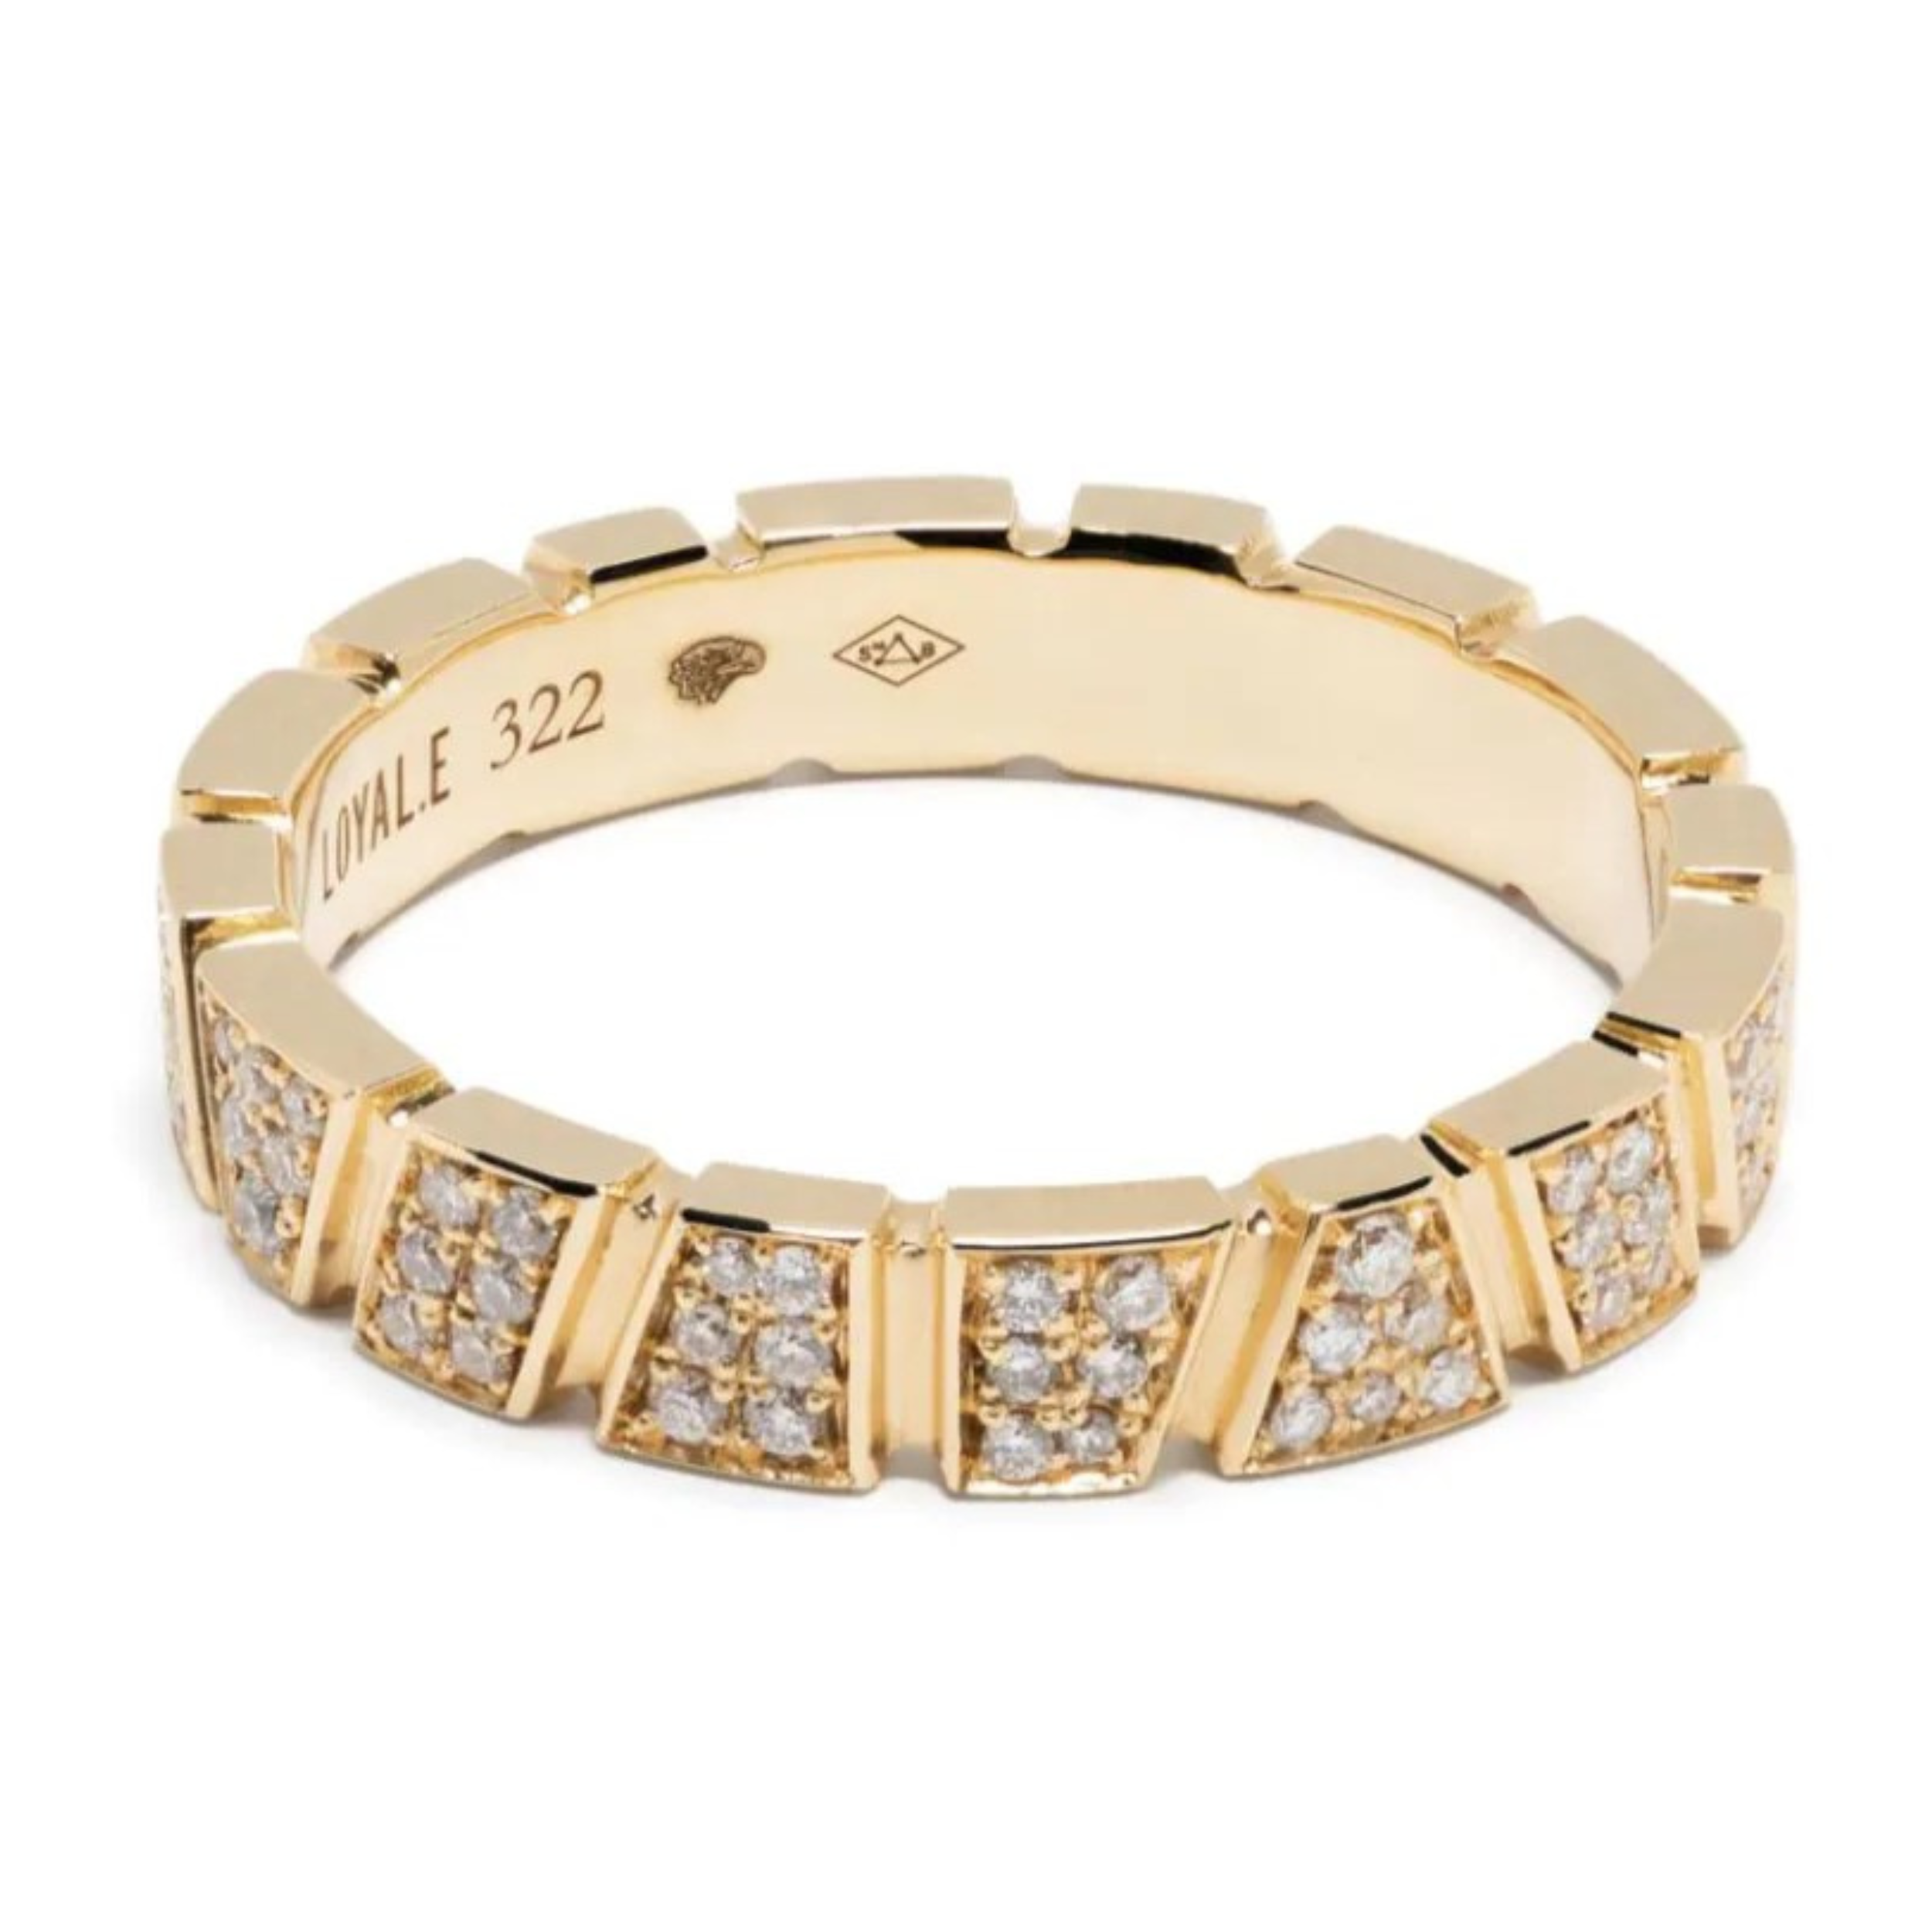 Ring Ride & Love pavée - 18k recycled yellow gold lab grown diamonds loyale paris fine jewelry 1